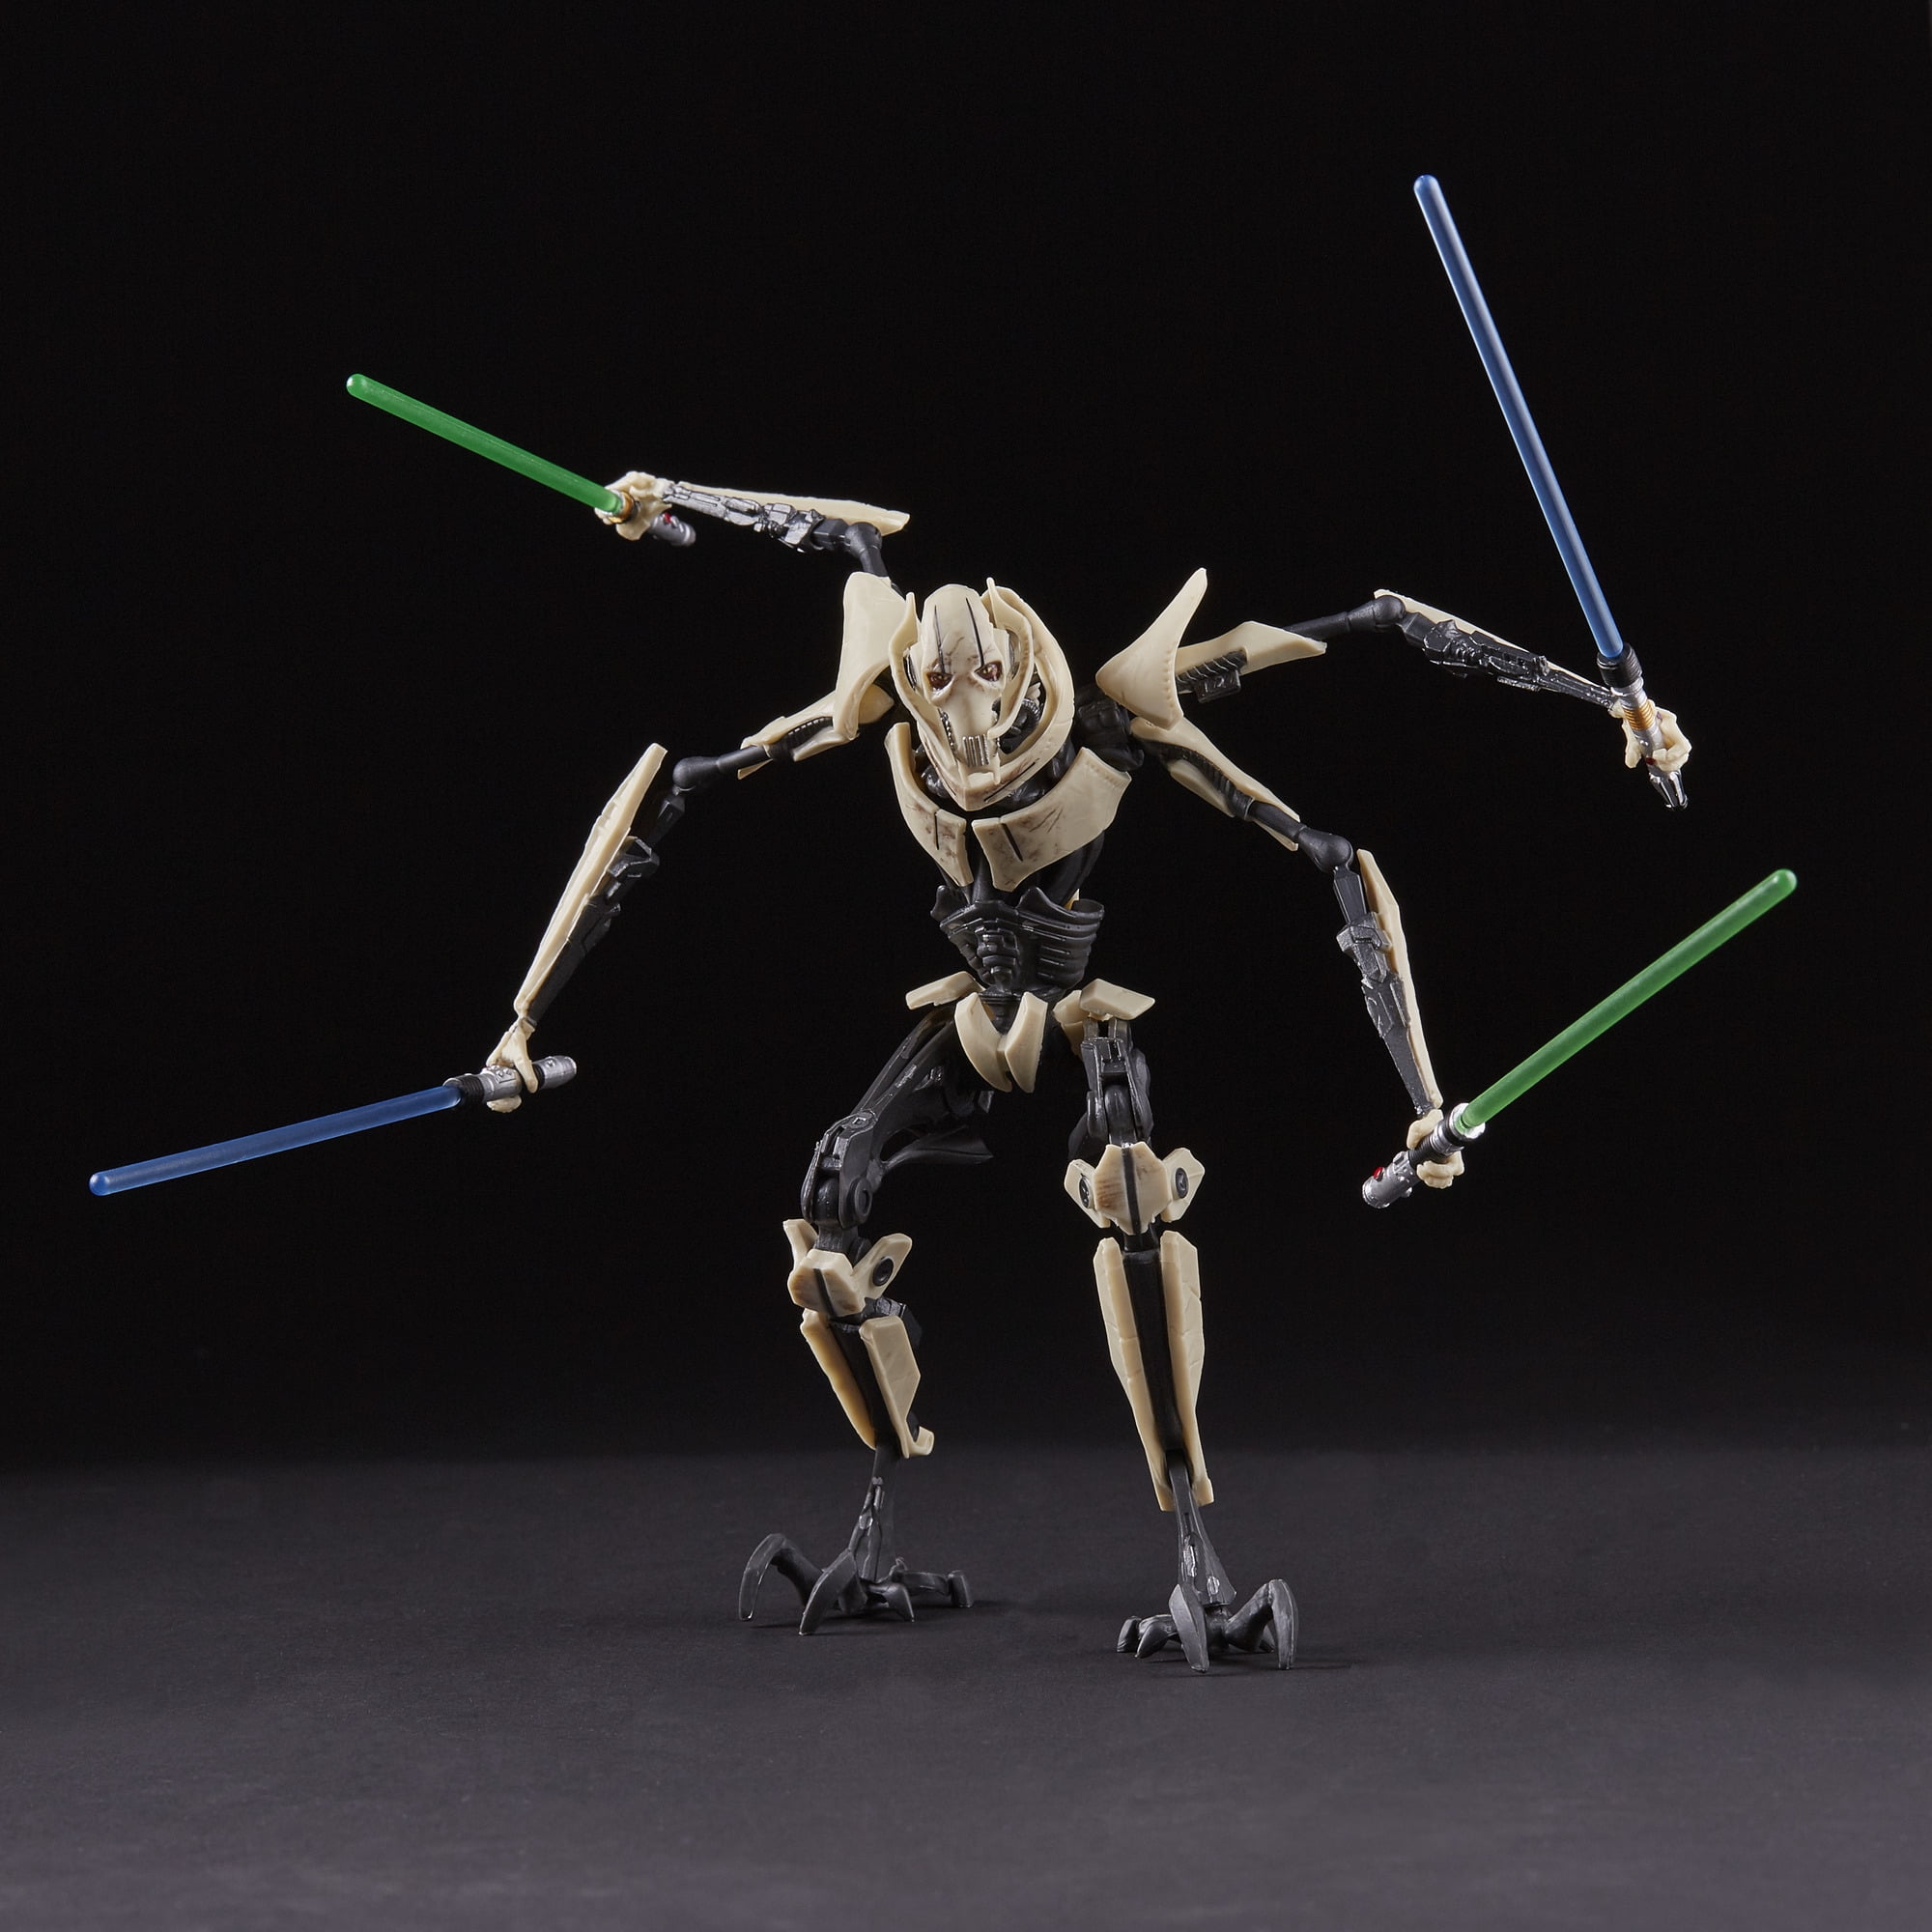 Star Wars The Black Series General Grievous Action Figure 6-Inch Scale 